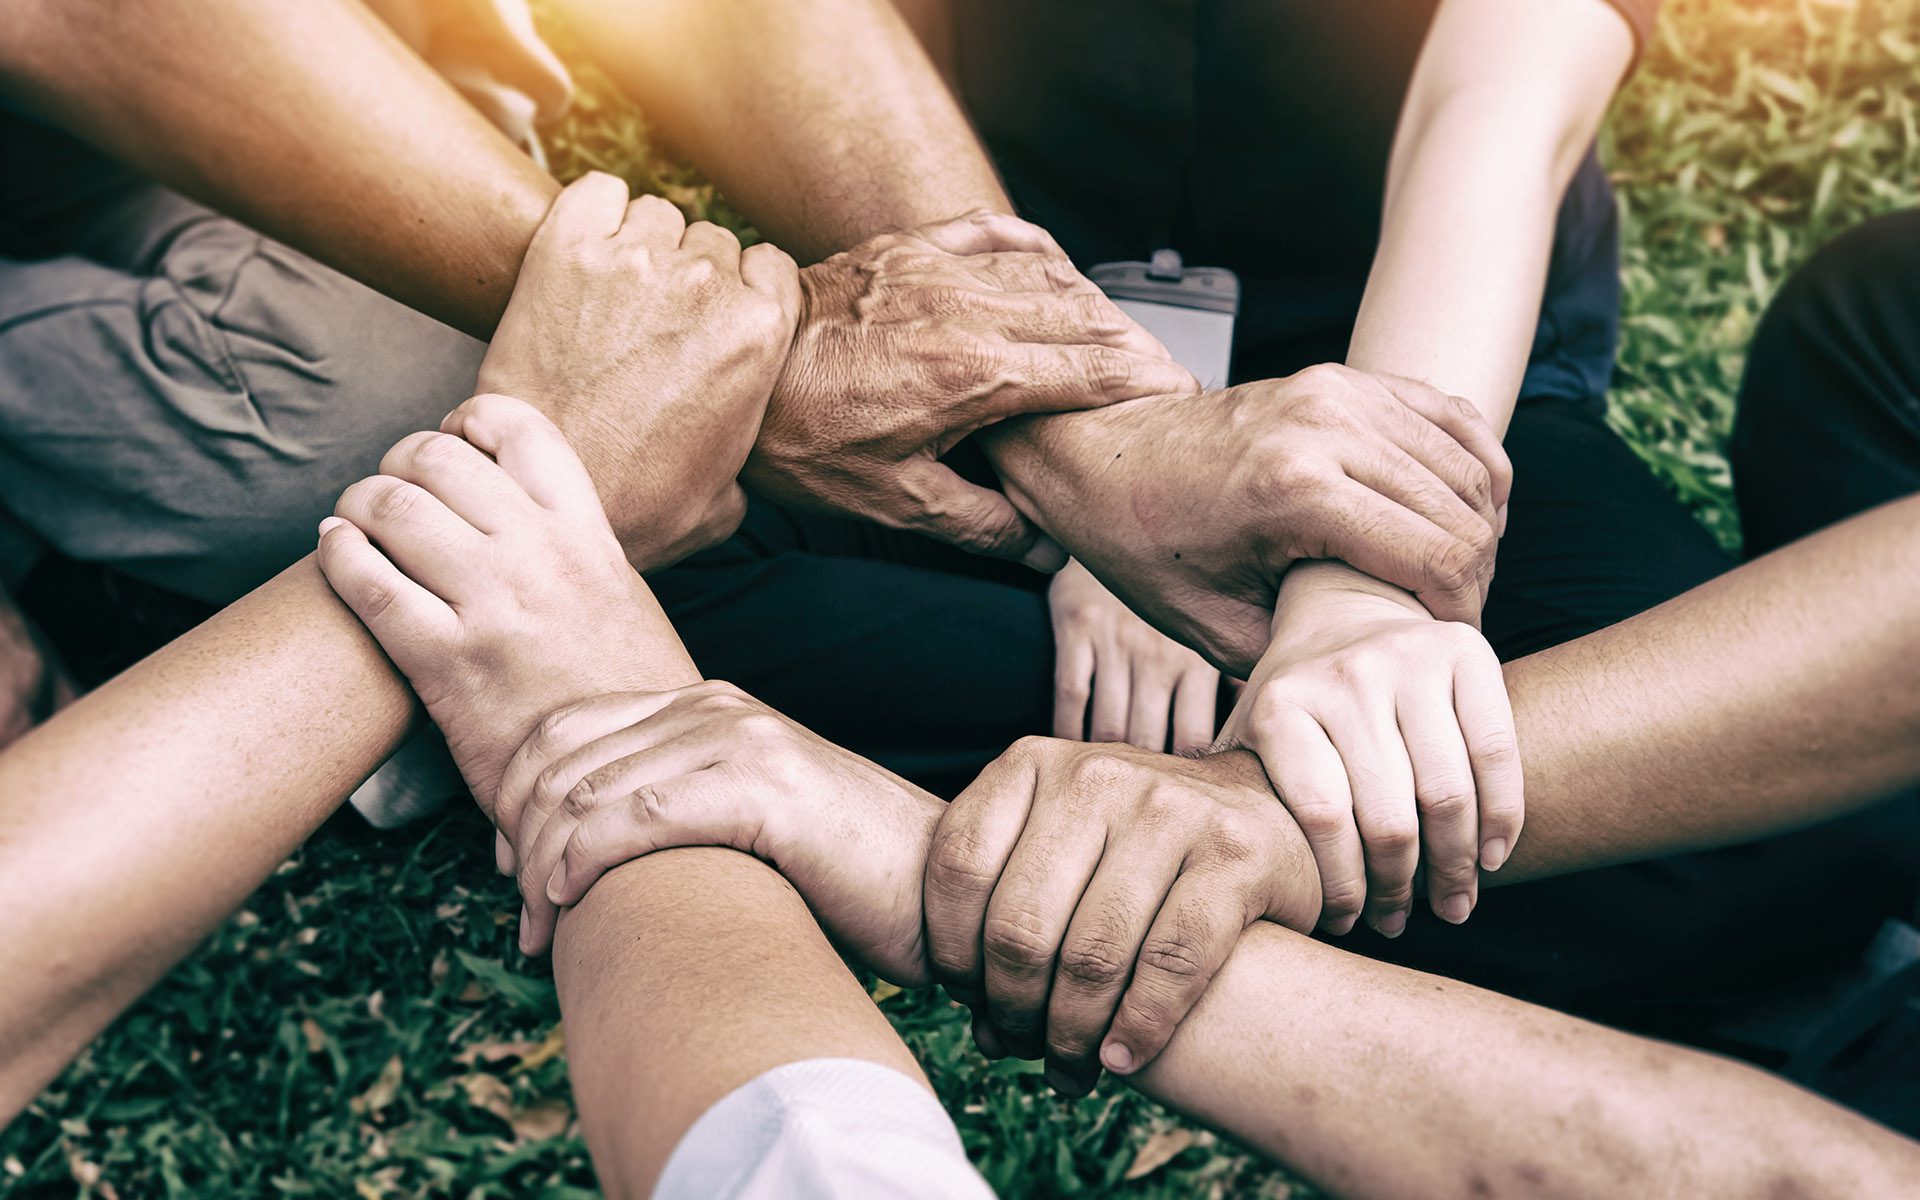 Homepage - Group of People Holding Each Other's Wrists